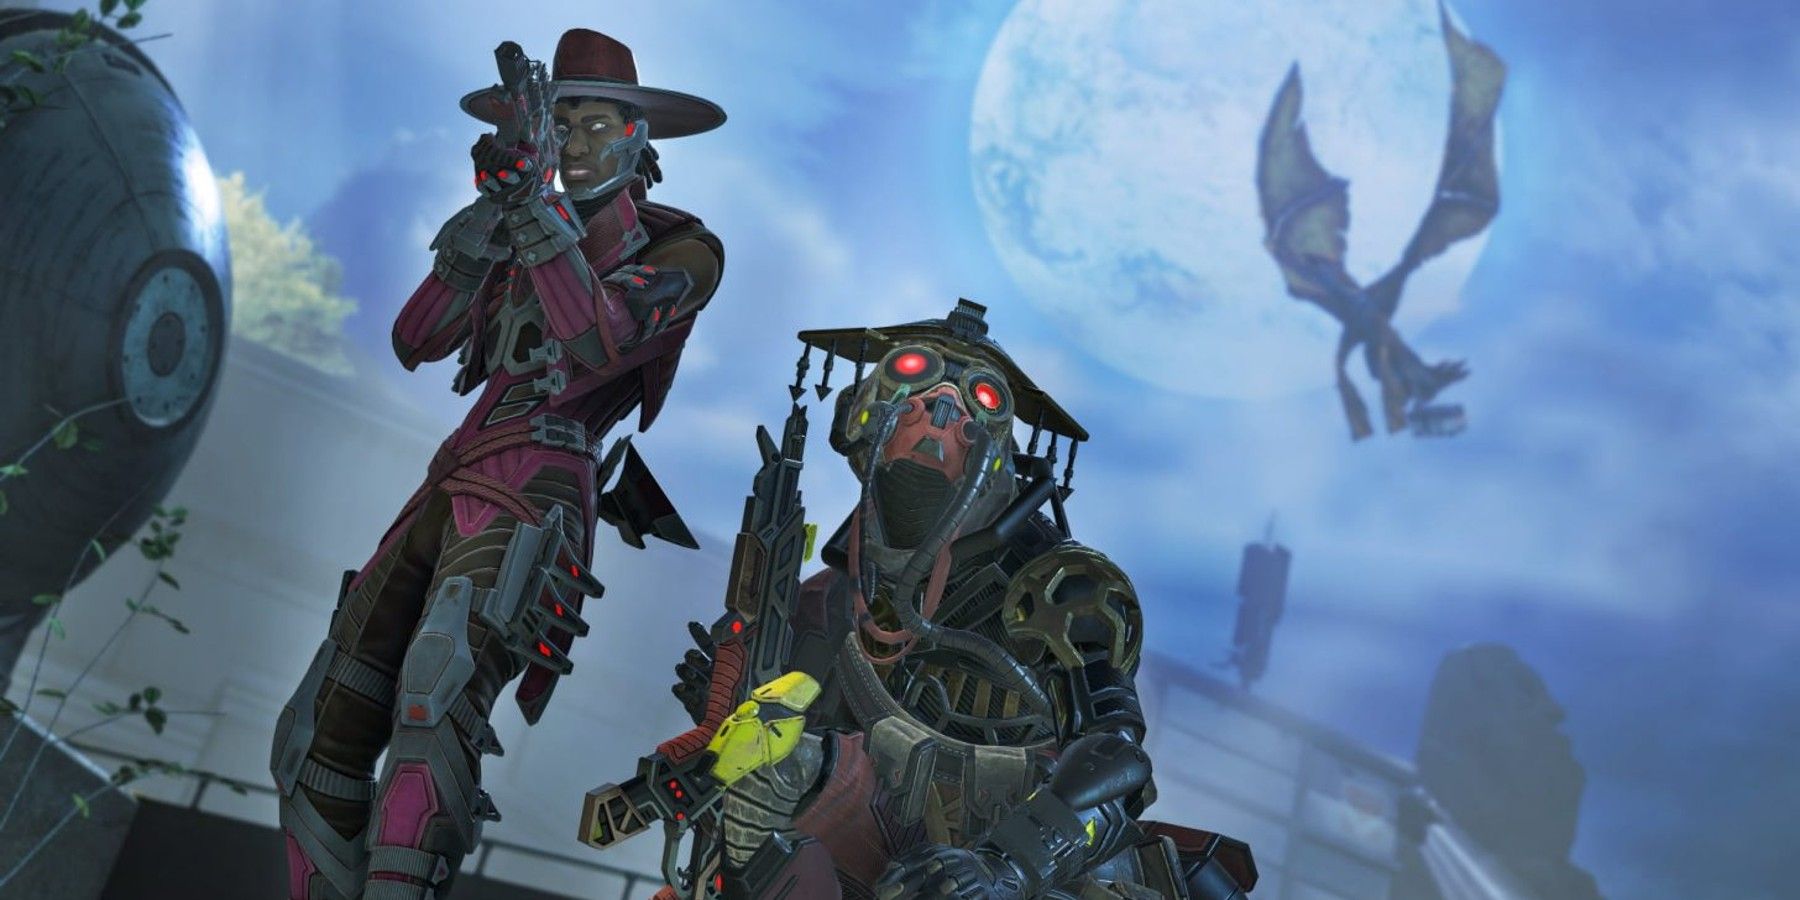 Apex Legends Announces New Monsters Within Event Bringing Halloween Cosmetics to the Game